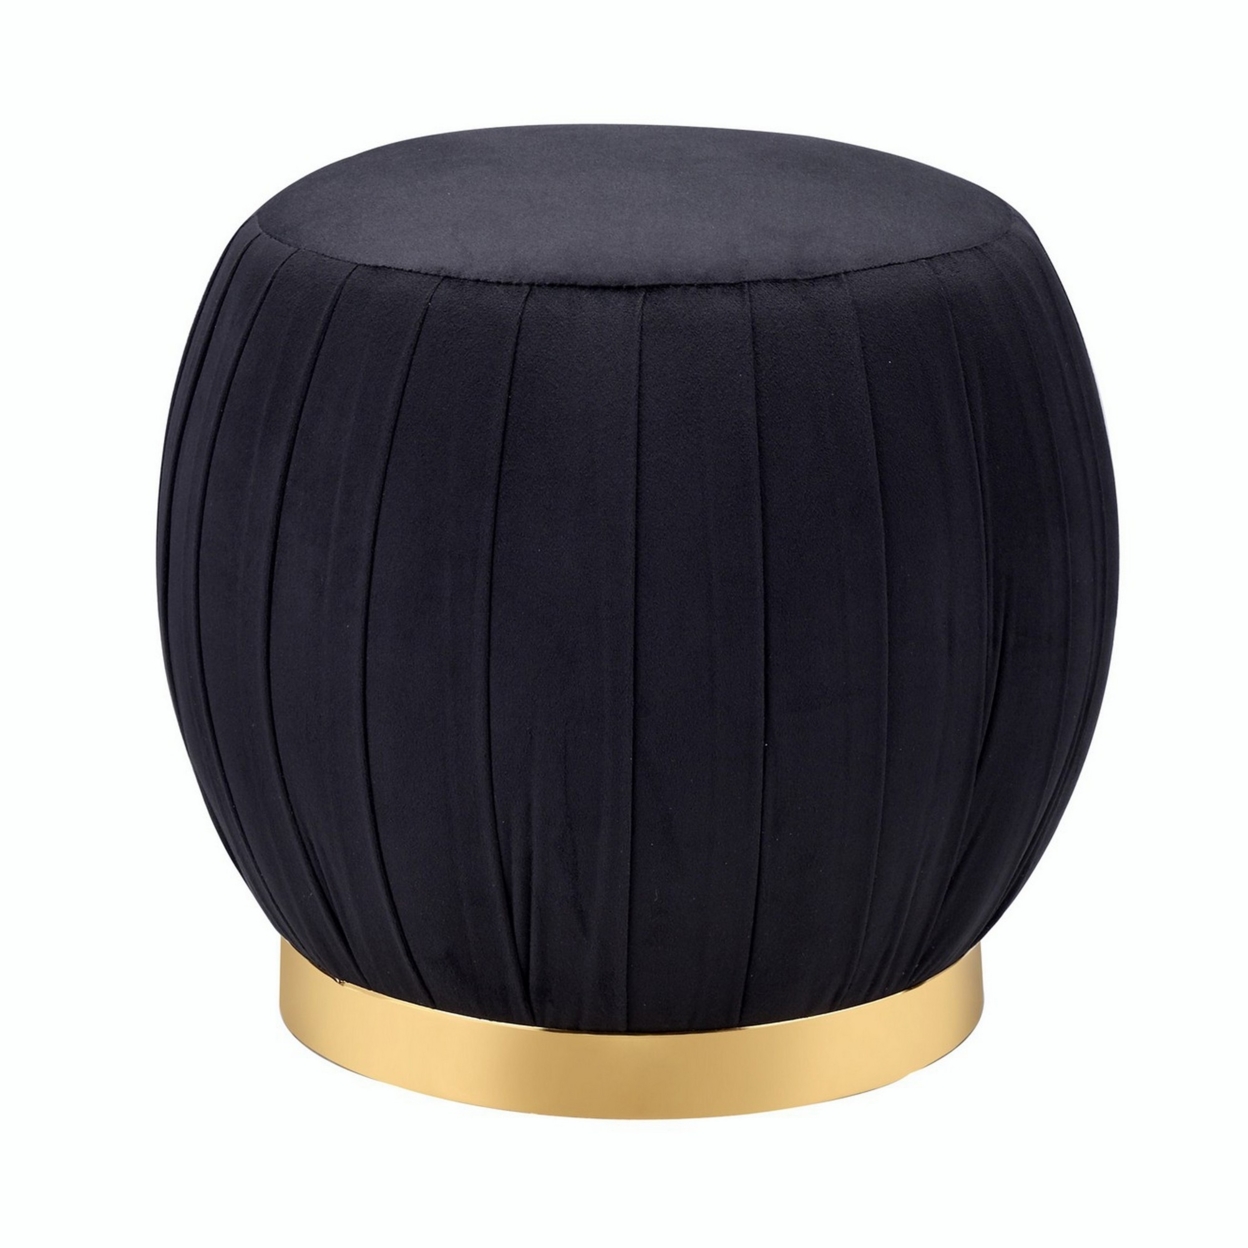 Fabric Upholstered Round Pleated Ottoman With Metal Base, Black And Gold- Saltoro Sherpi